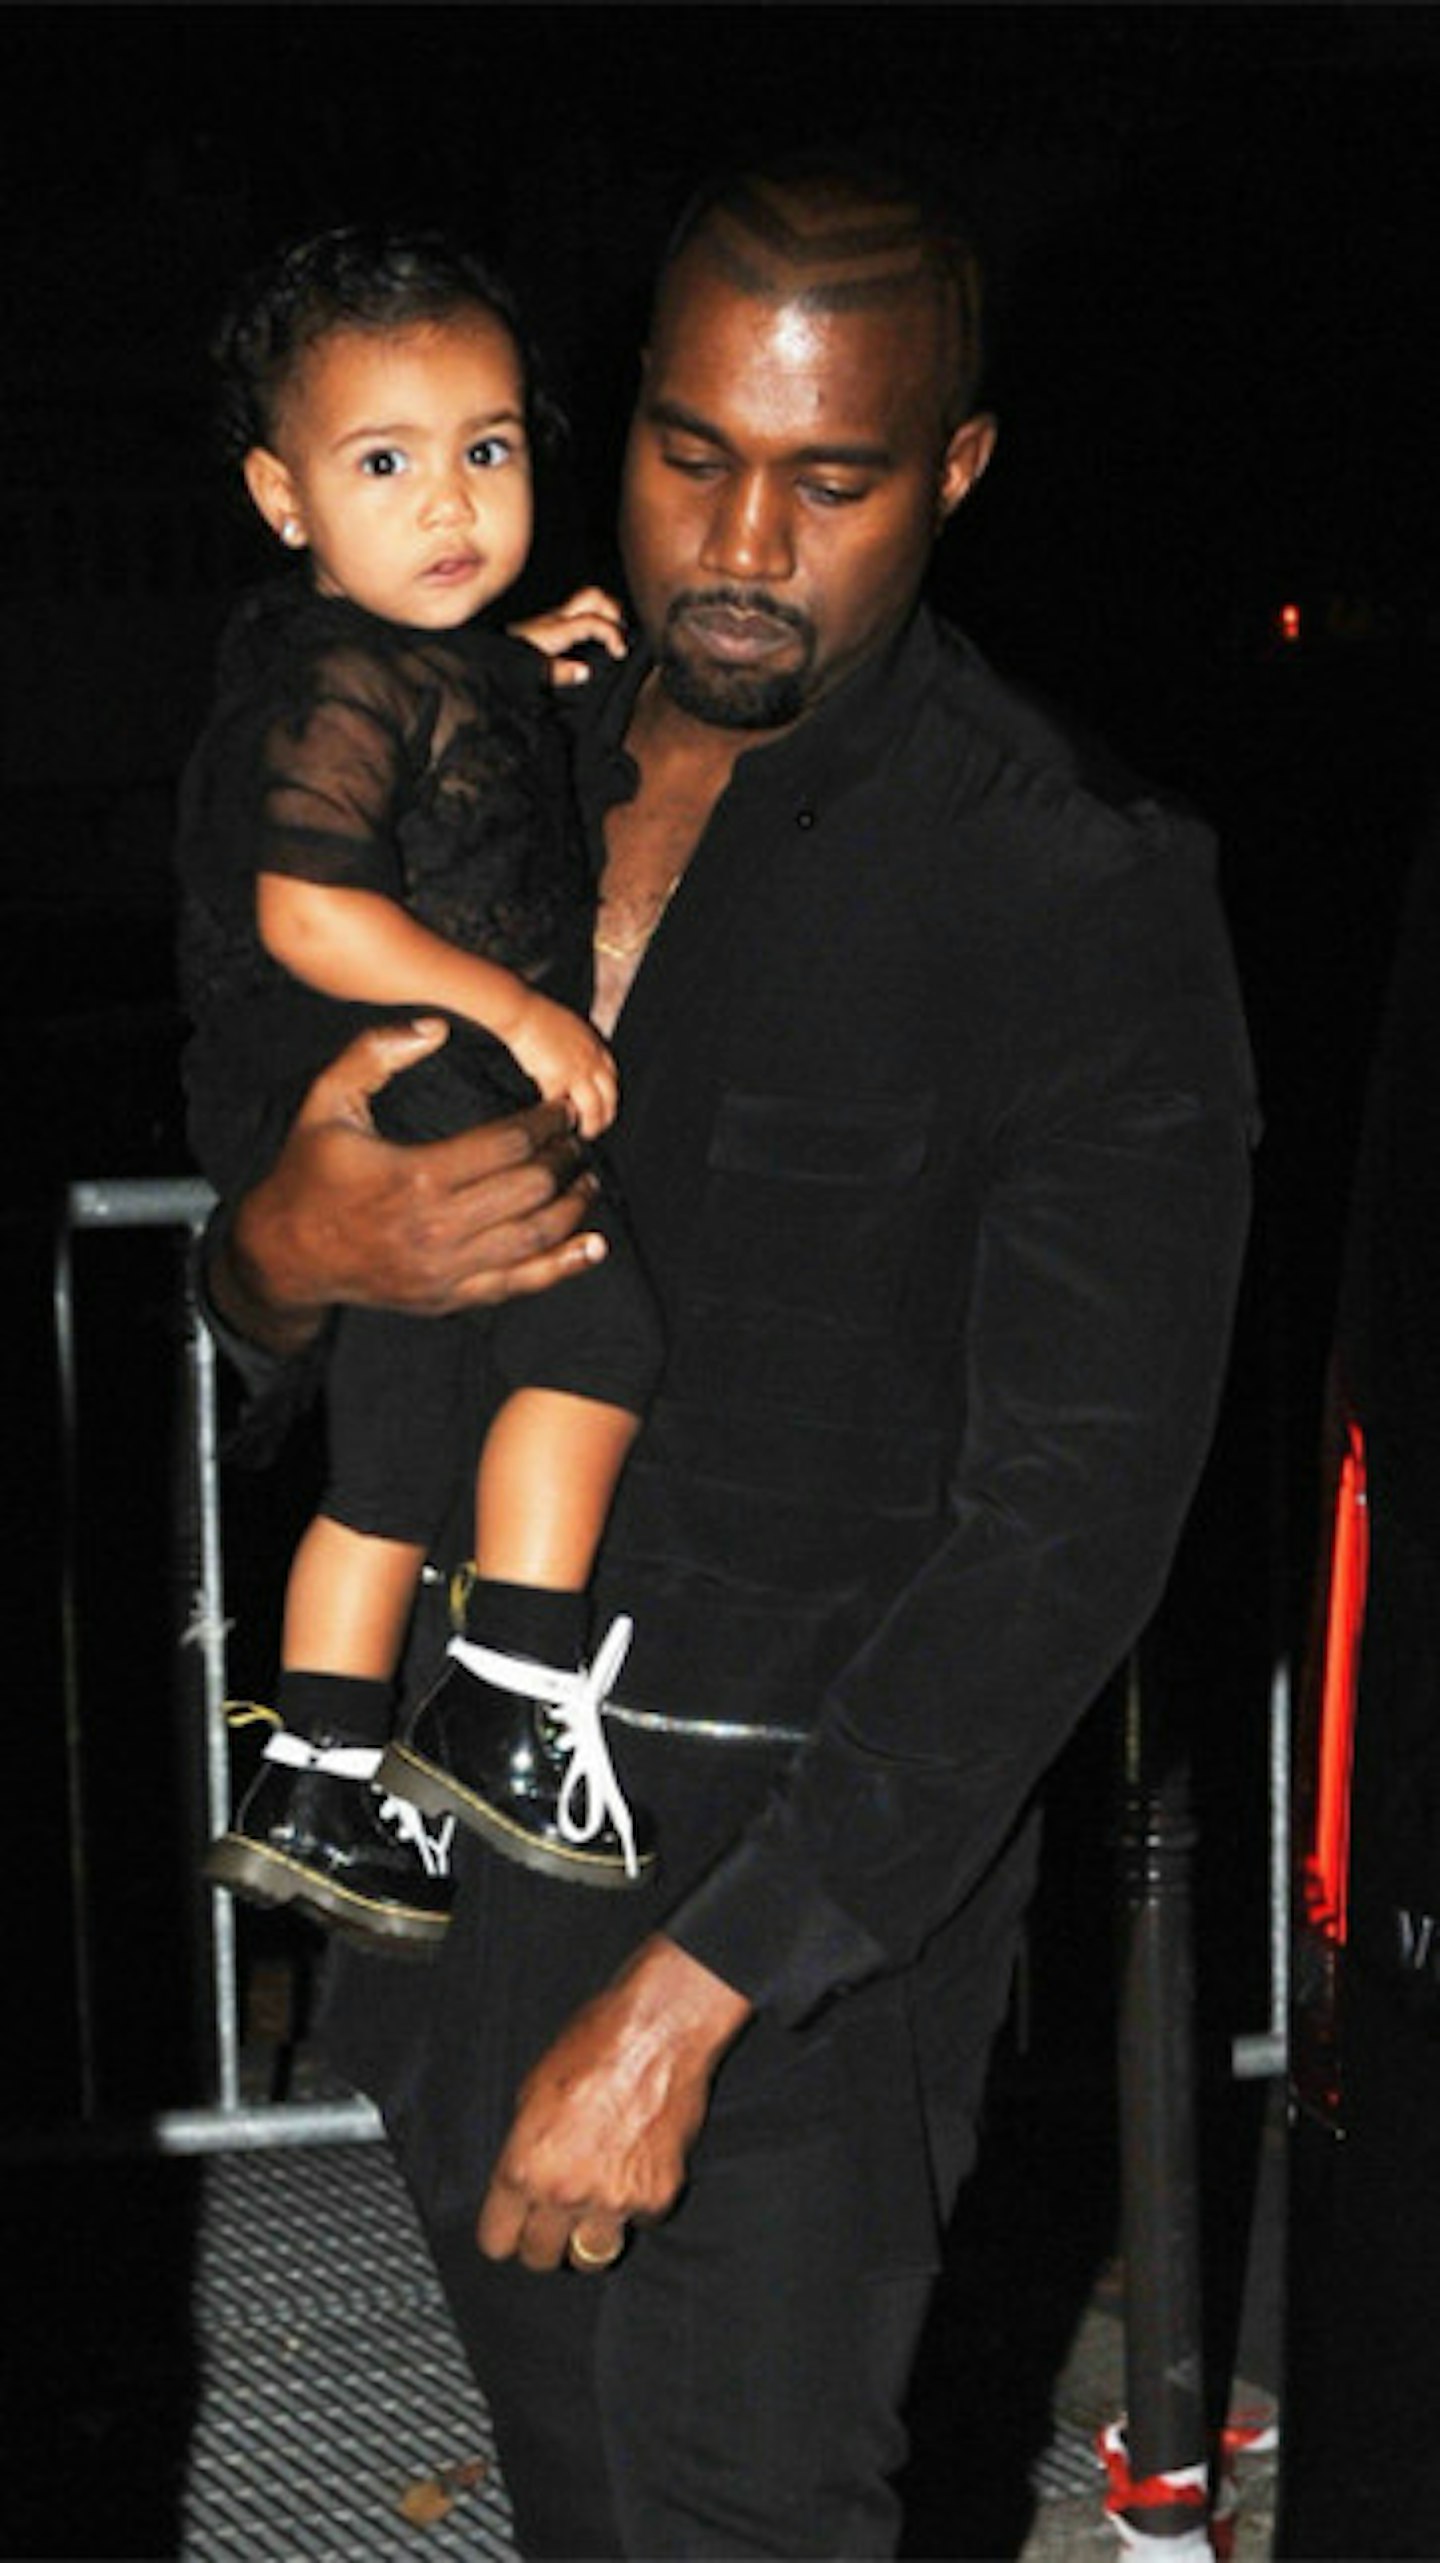 Kanye is said to be constantly worried about Kim and their daughter North